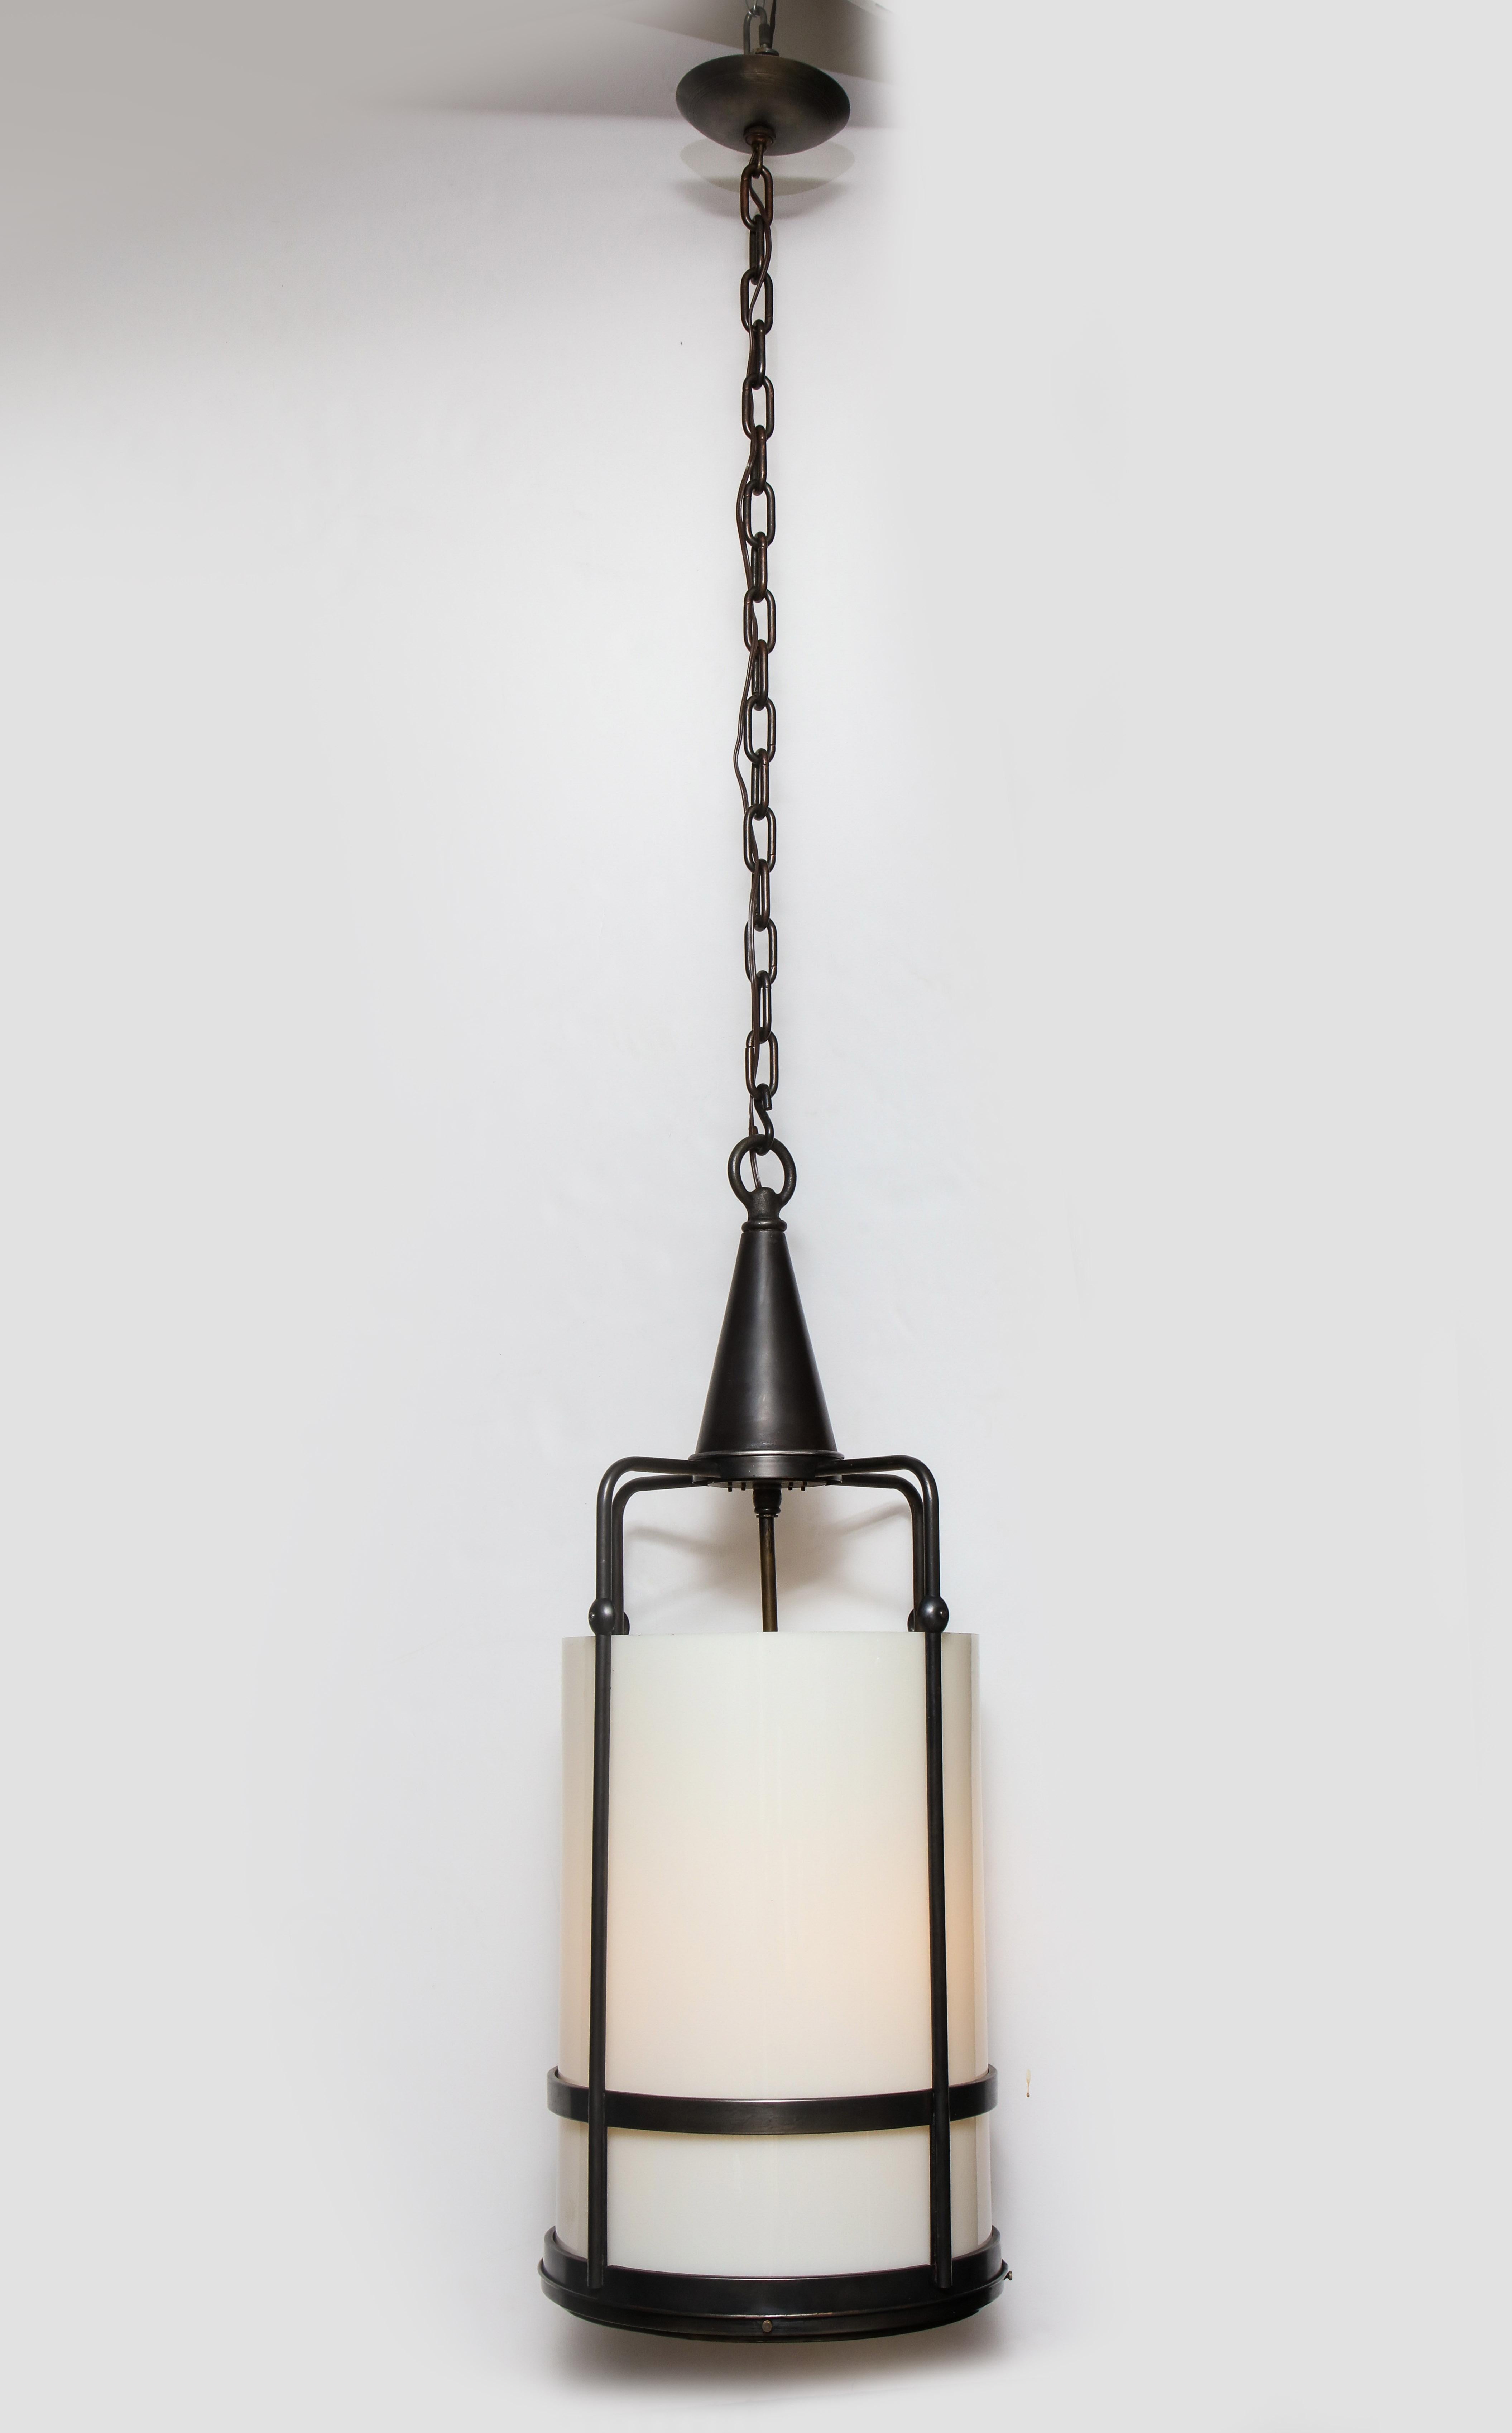 Arts & Crafts style heavy aged bronze frame lantern pendant with a thick white milk glass diffuser. Lantern houses 4-light sources which use Edison type bulbs. Rewired for use in the USA. Lantern body measures 37